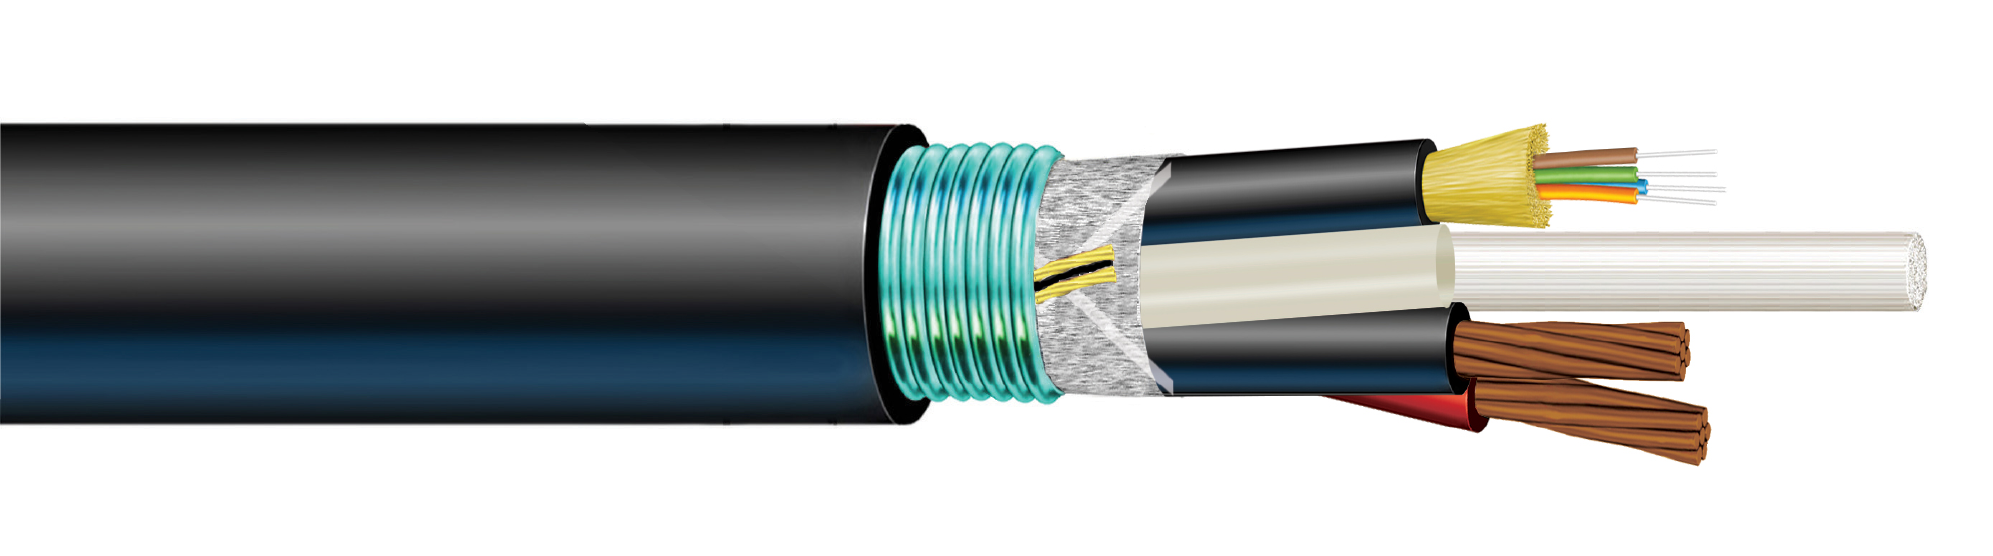 ezMOBILITY™ Fiber-Copper Composite Cable FTTA Feeder cable (8 AWG Conductors)